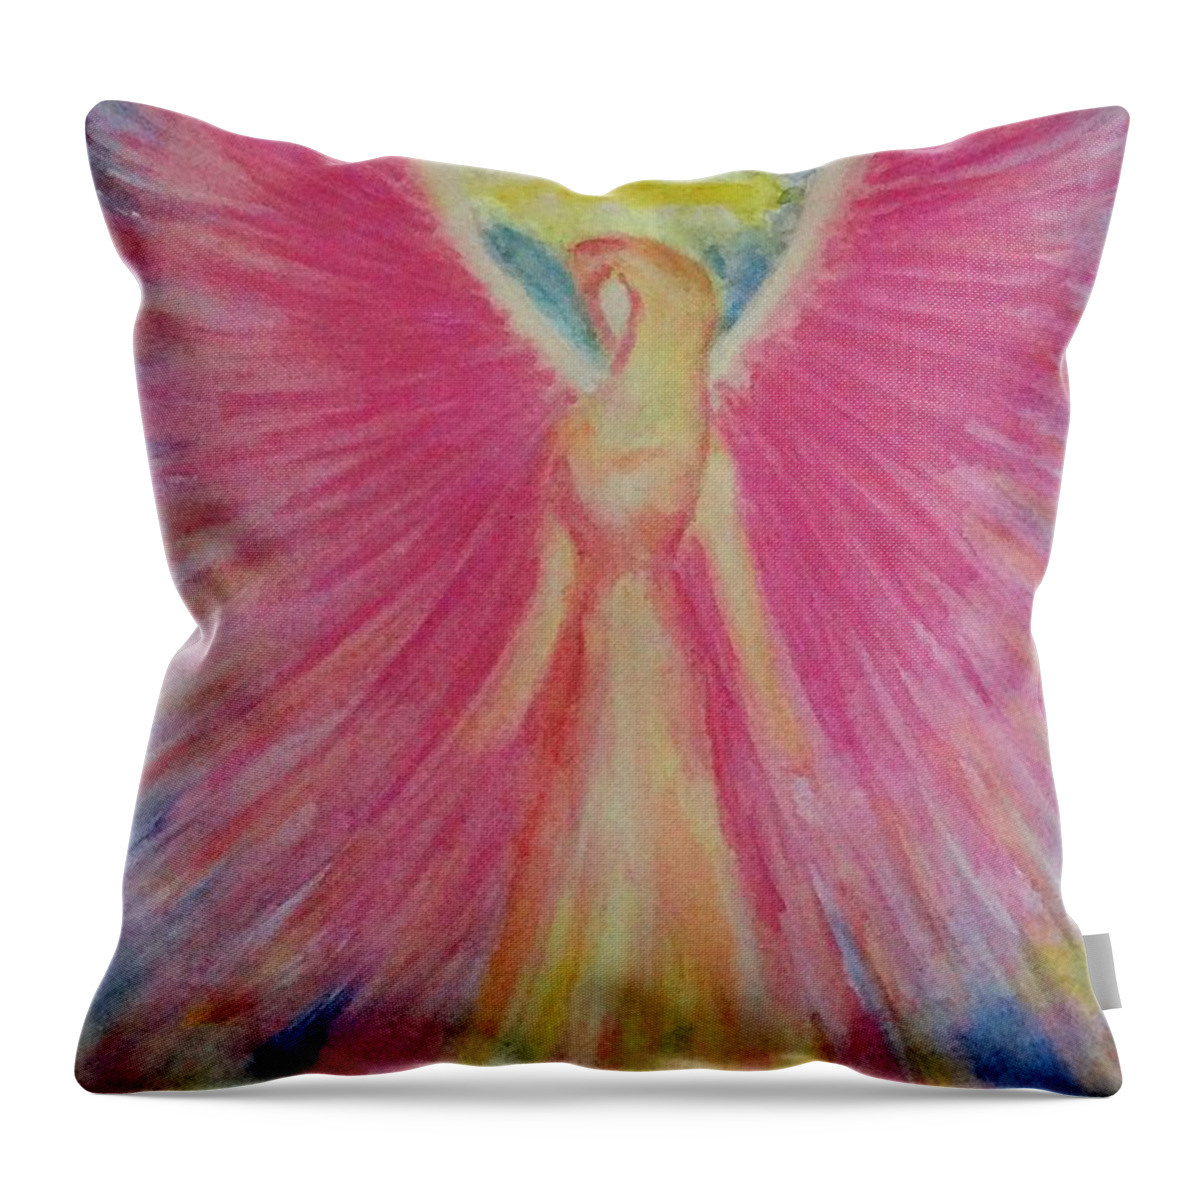 Amelya Throw Pillow featuring the painting Amelya's Angel by J L Zarek